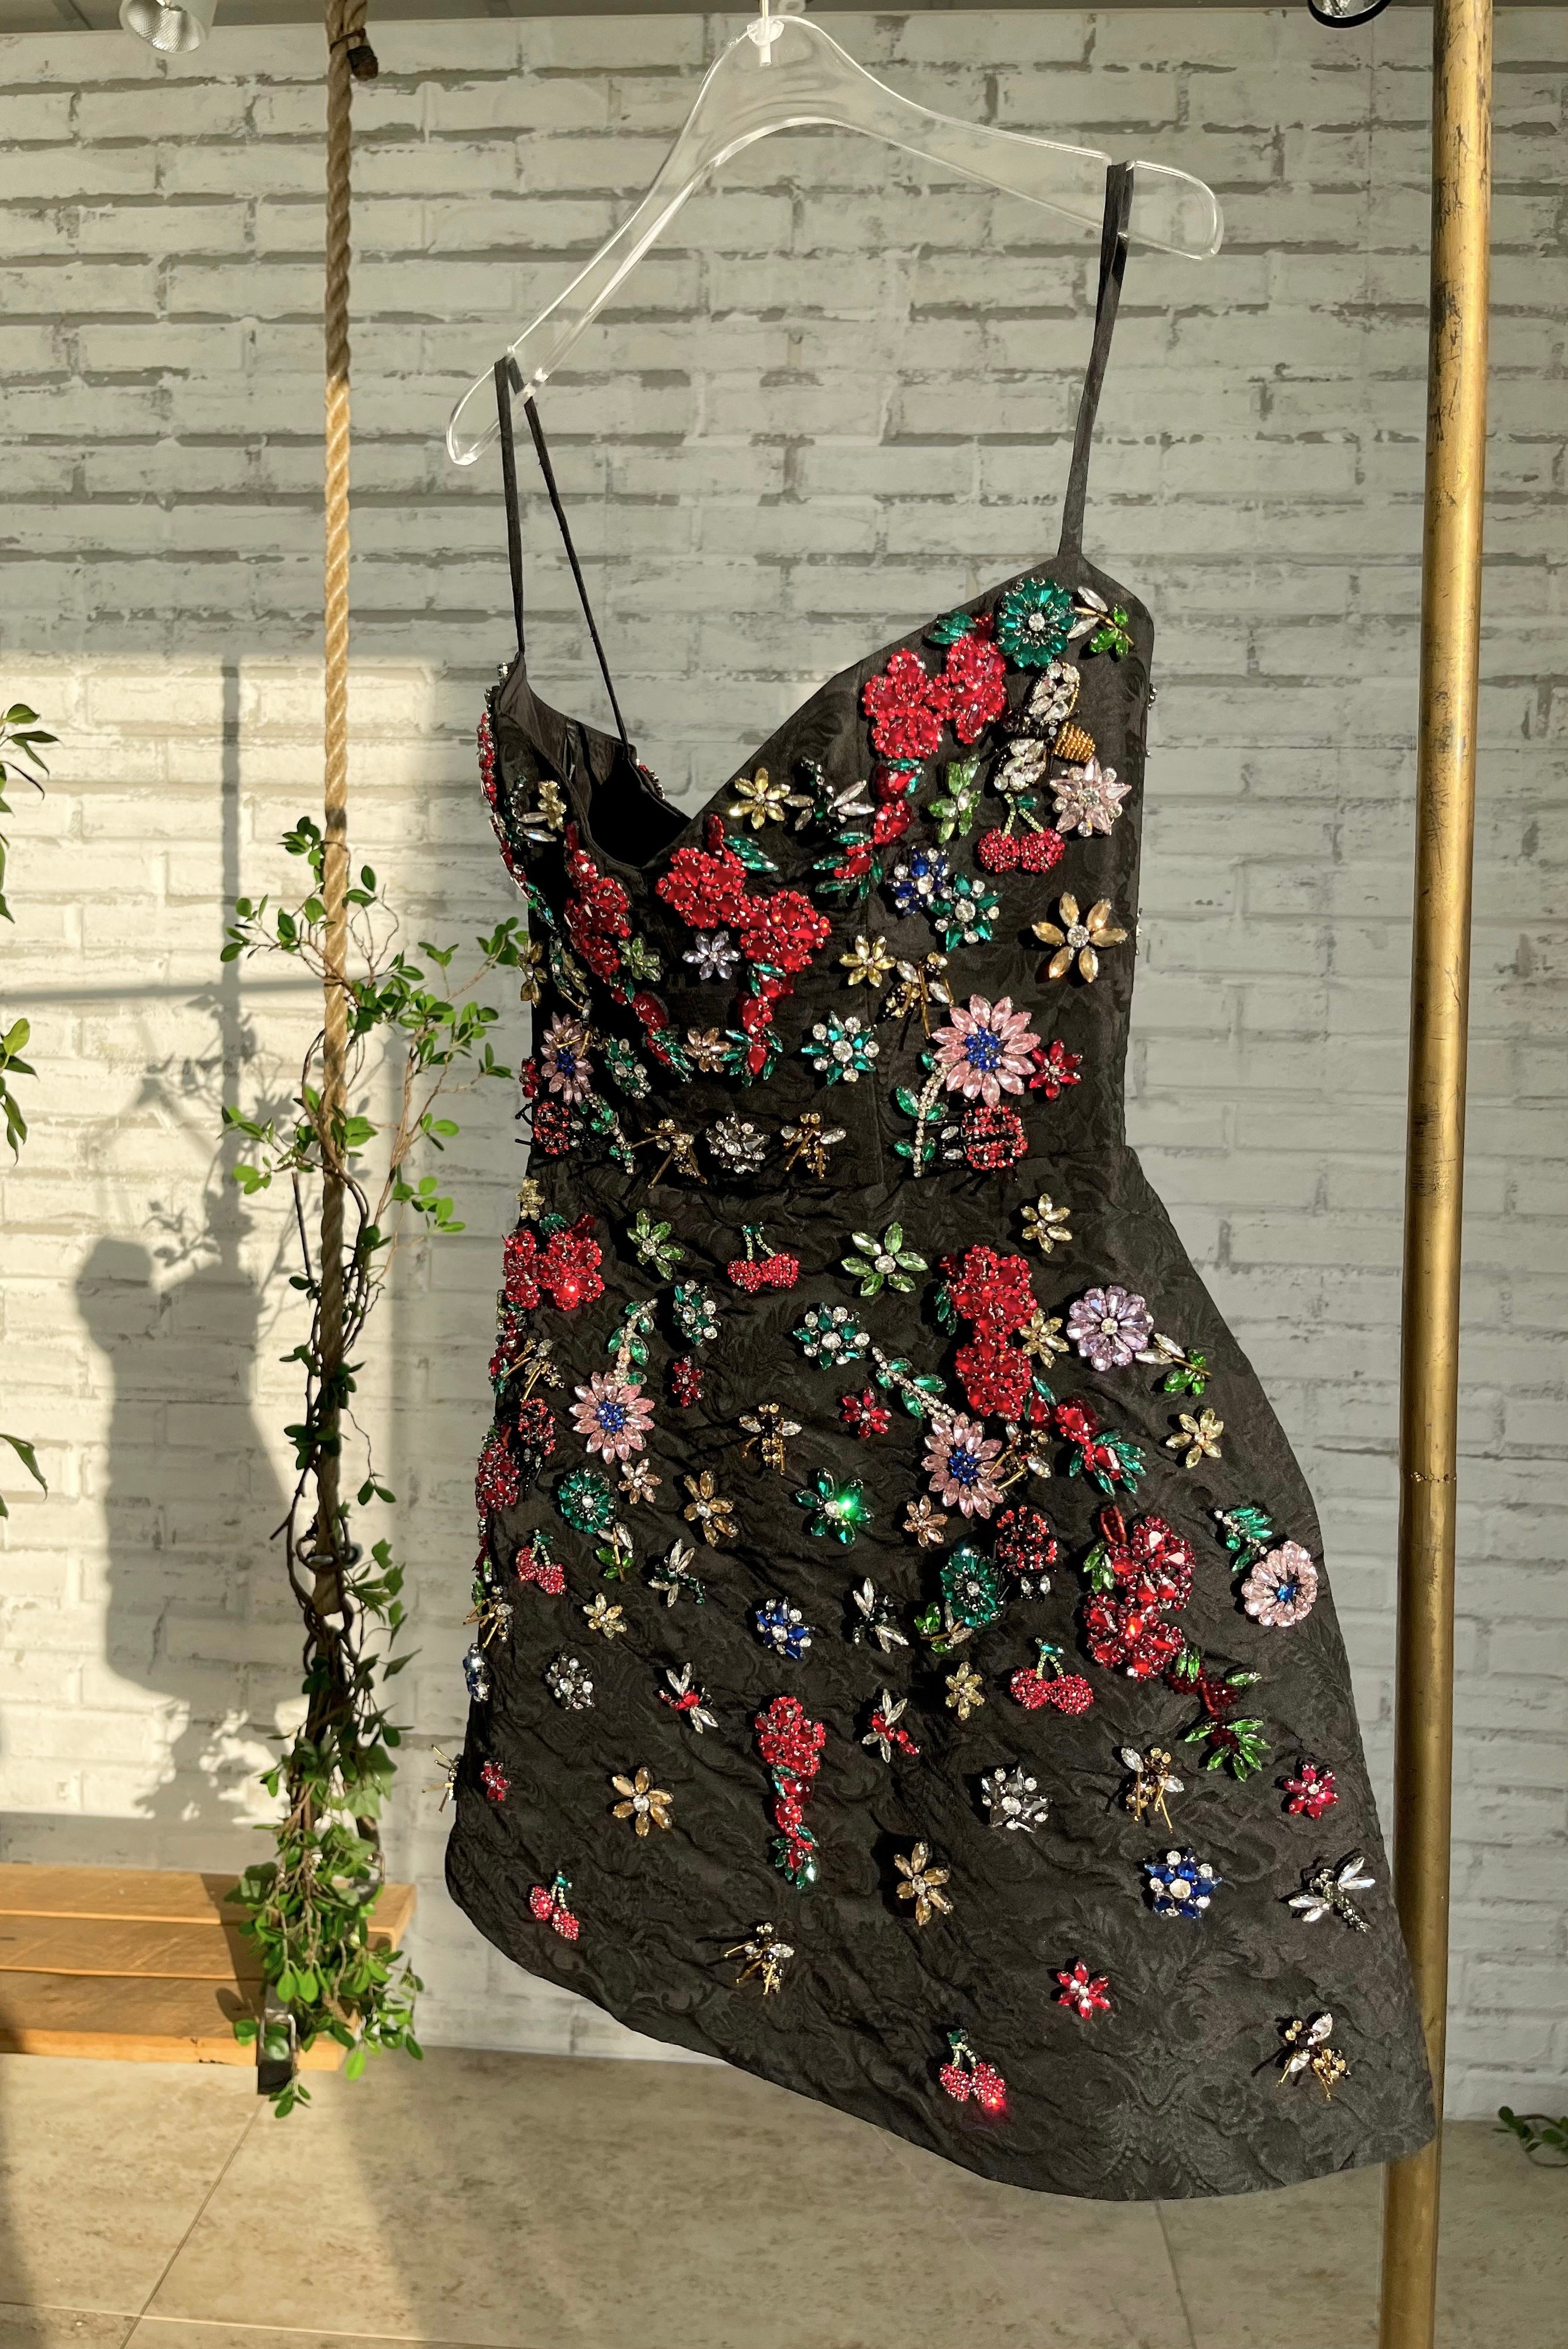 Black mini dress with spaghetti straps and embroidery